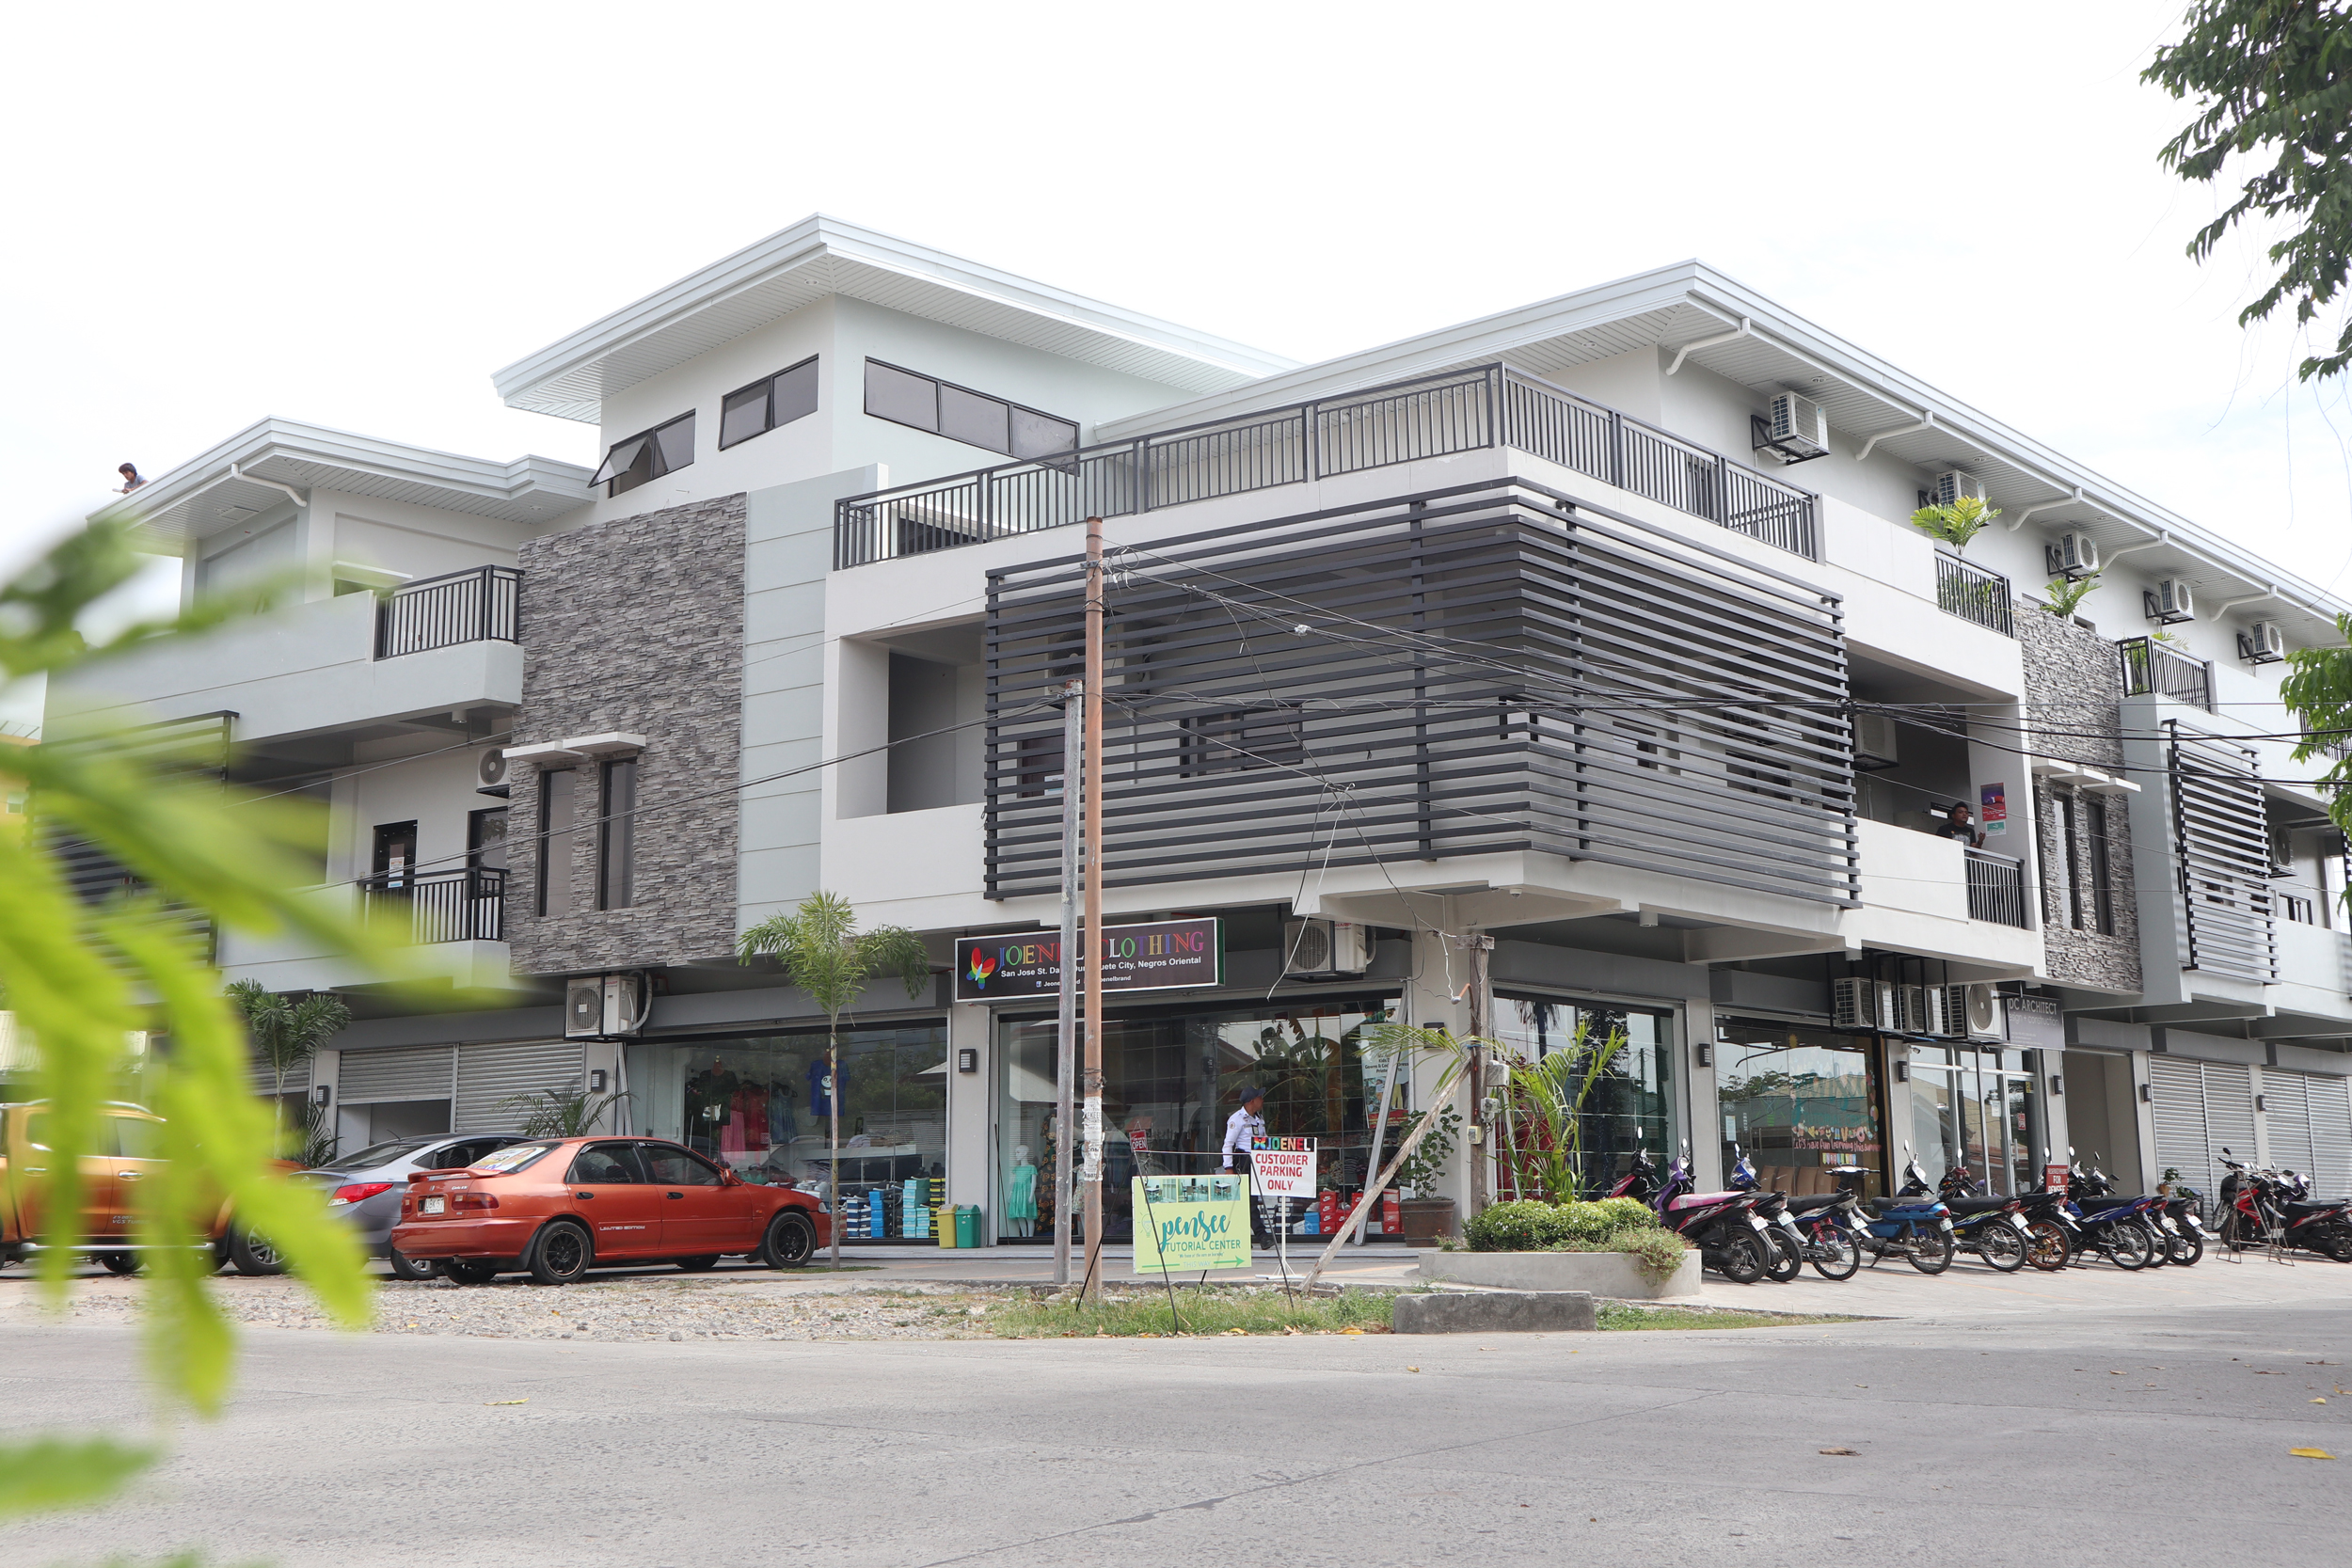 Pac Biz Dumaguete, where Pac Biz operates from in Dumaguete, Philippines, completed in 2019.